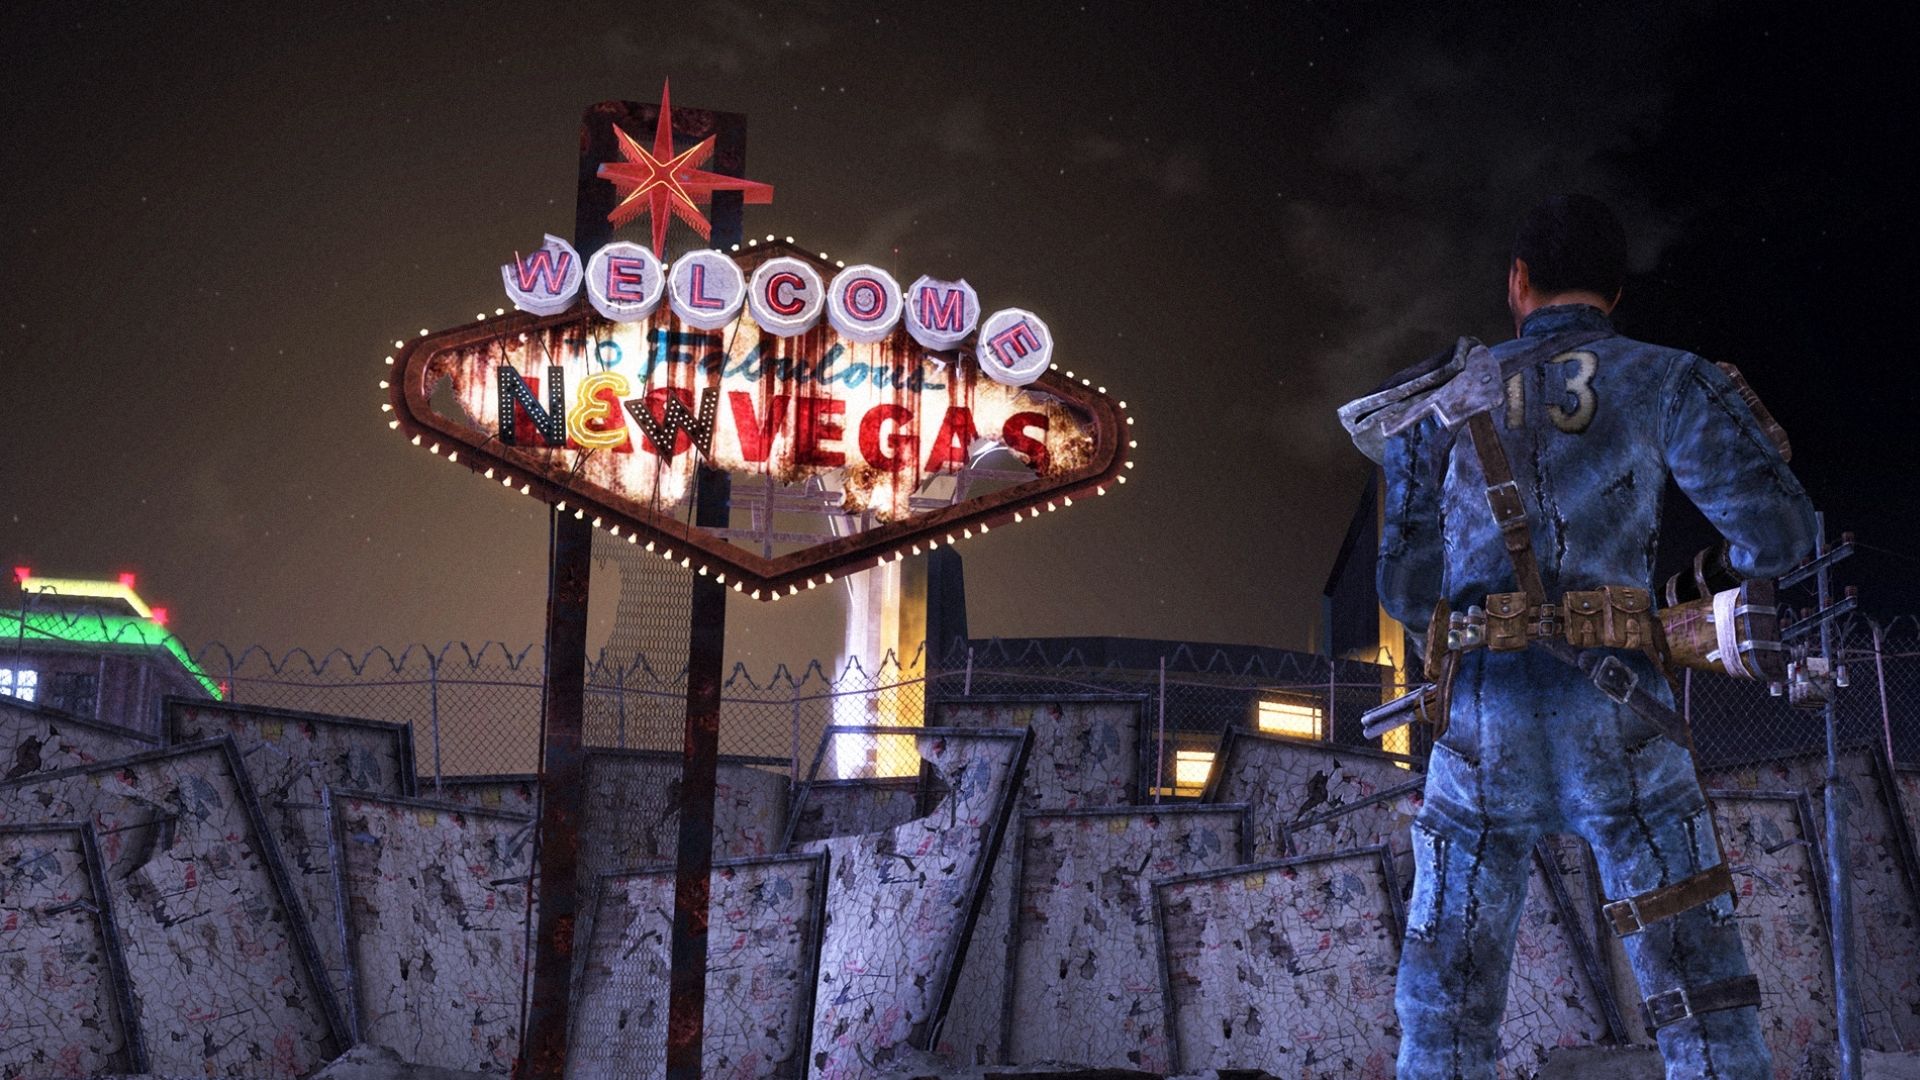 The entrance to New Vegas